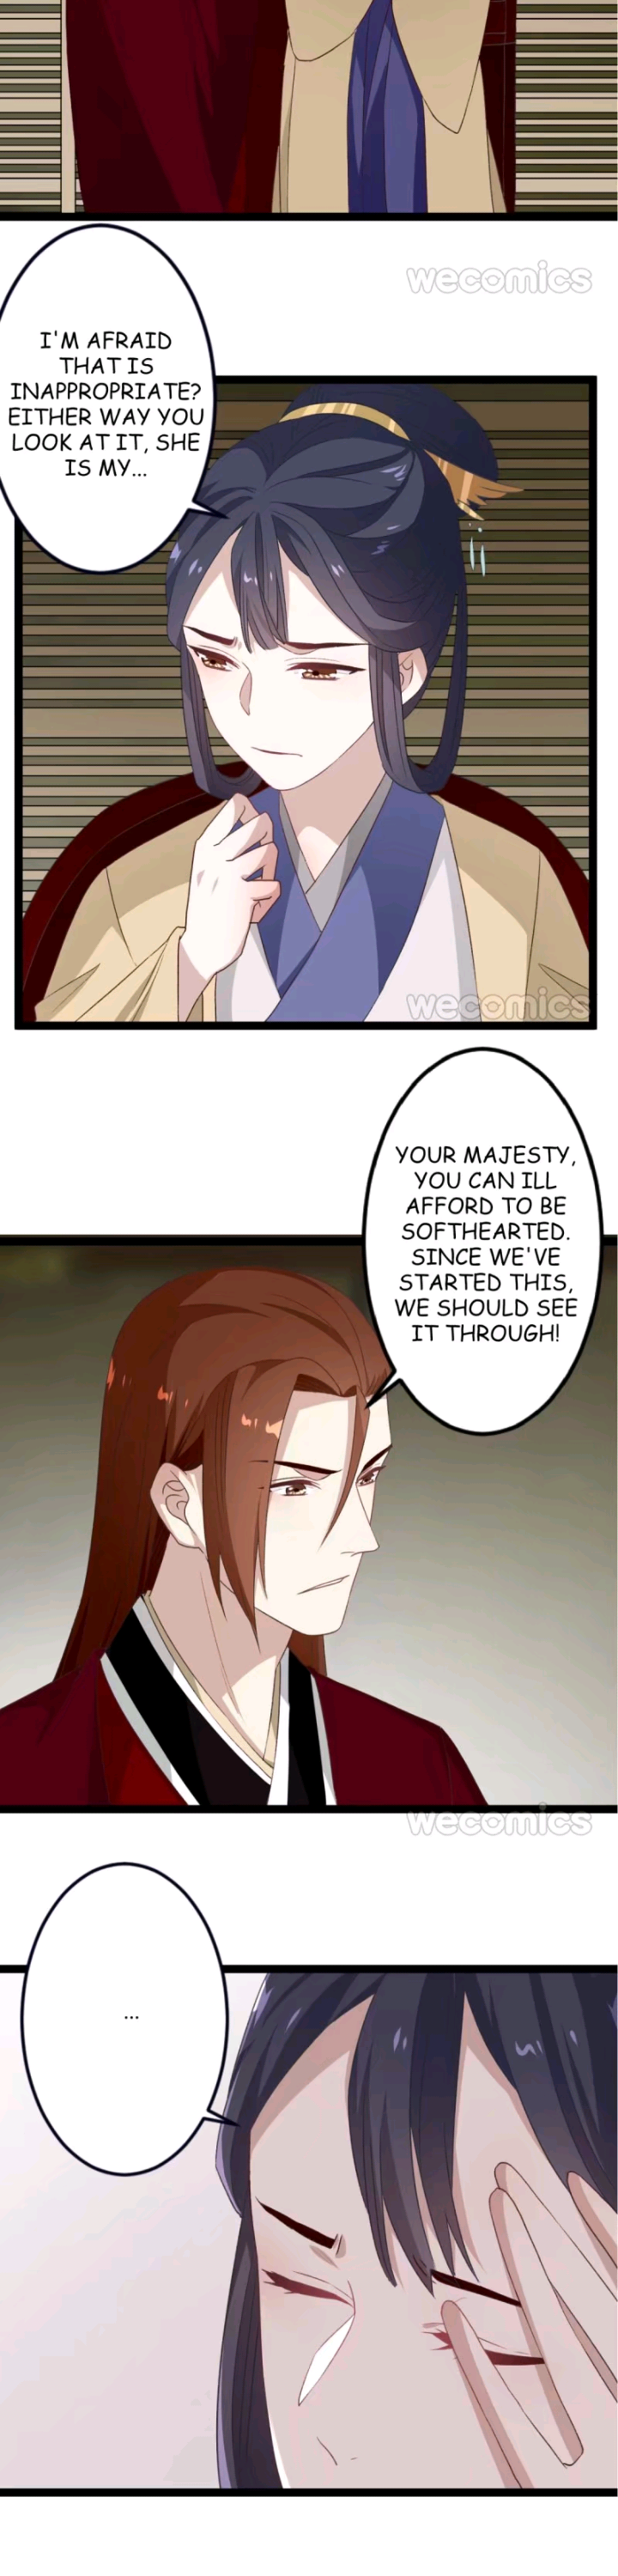 Curse of Loulan: The Tyrant Bestows Favor on Me Chapter 85 page 20